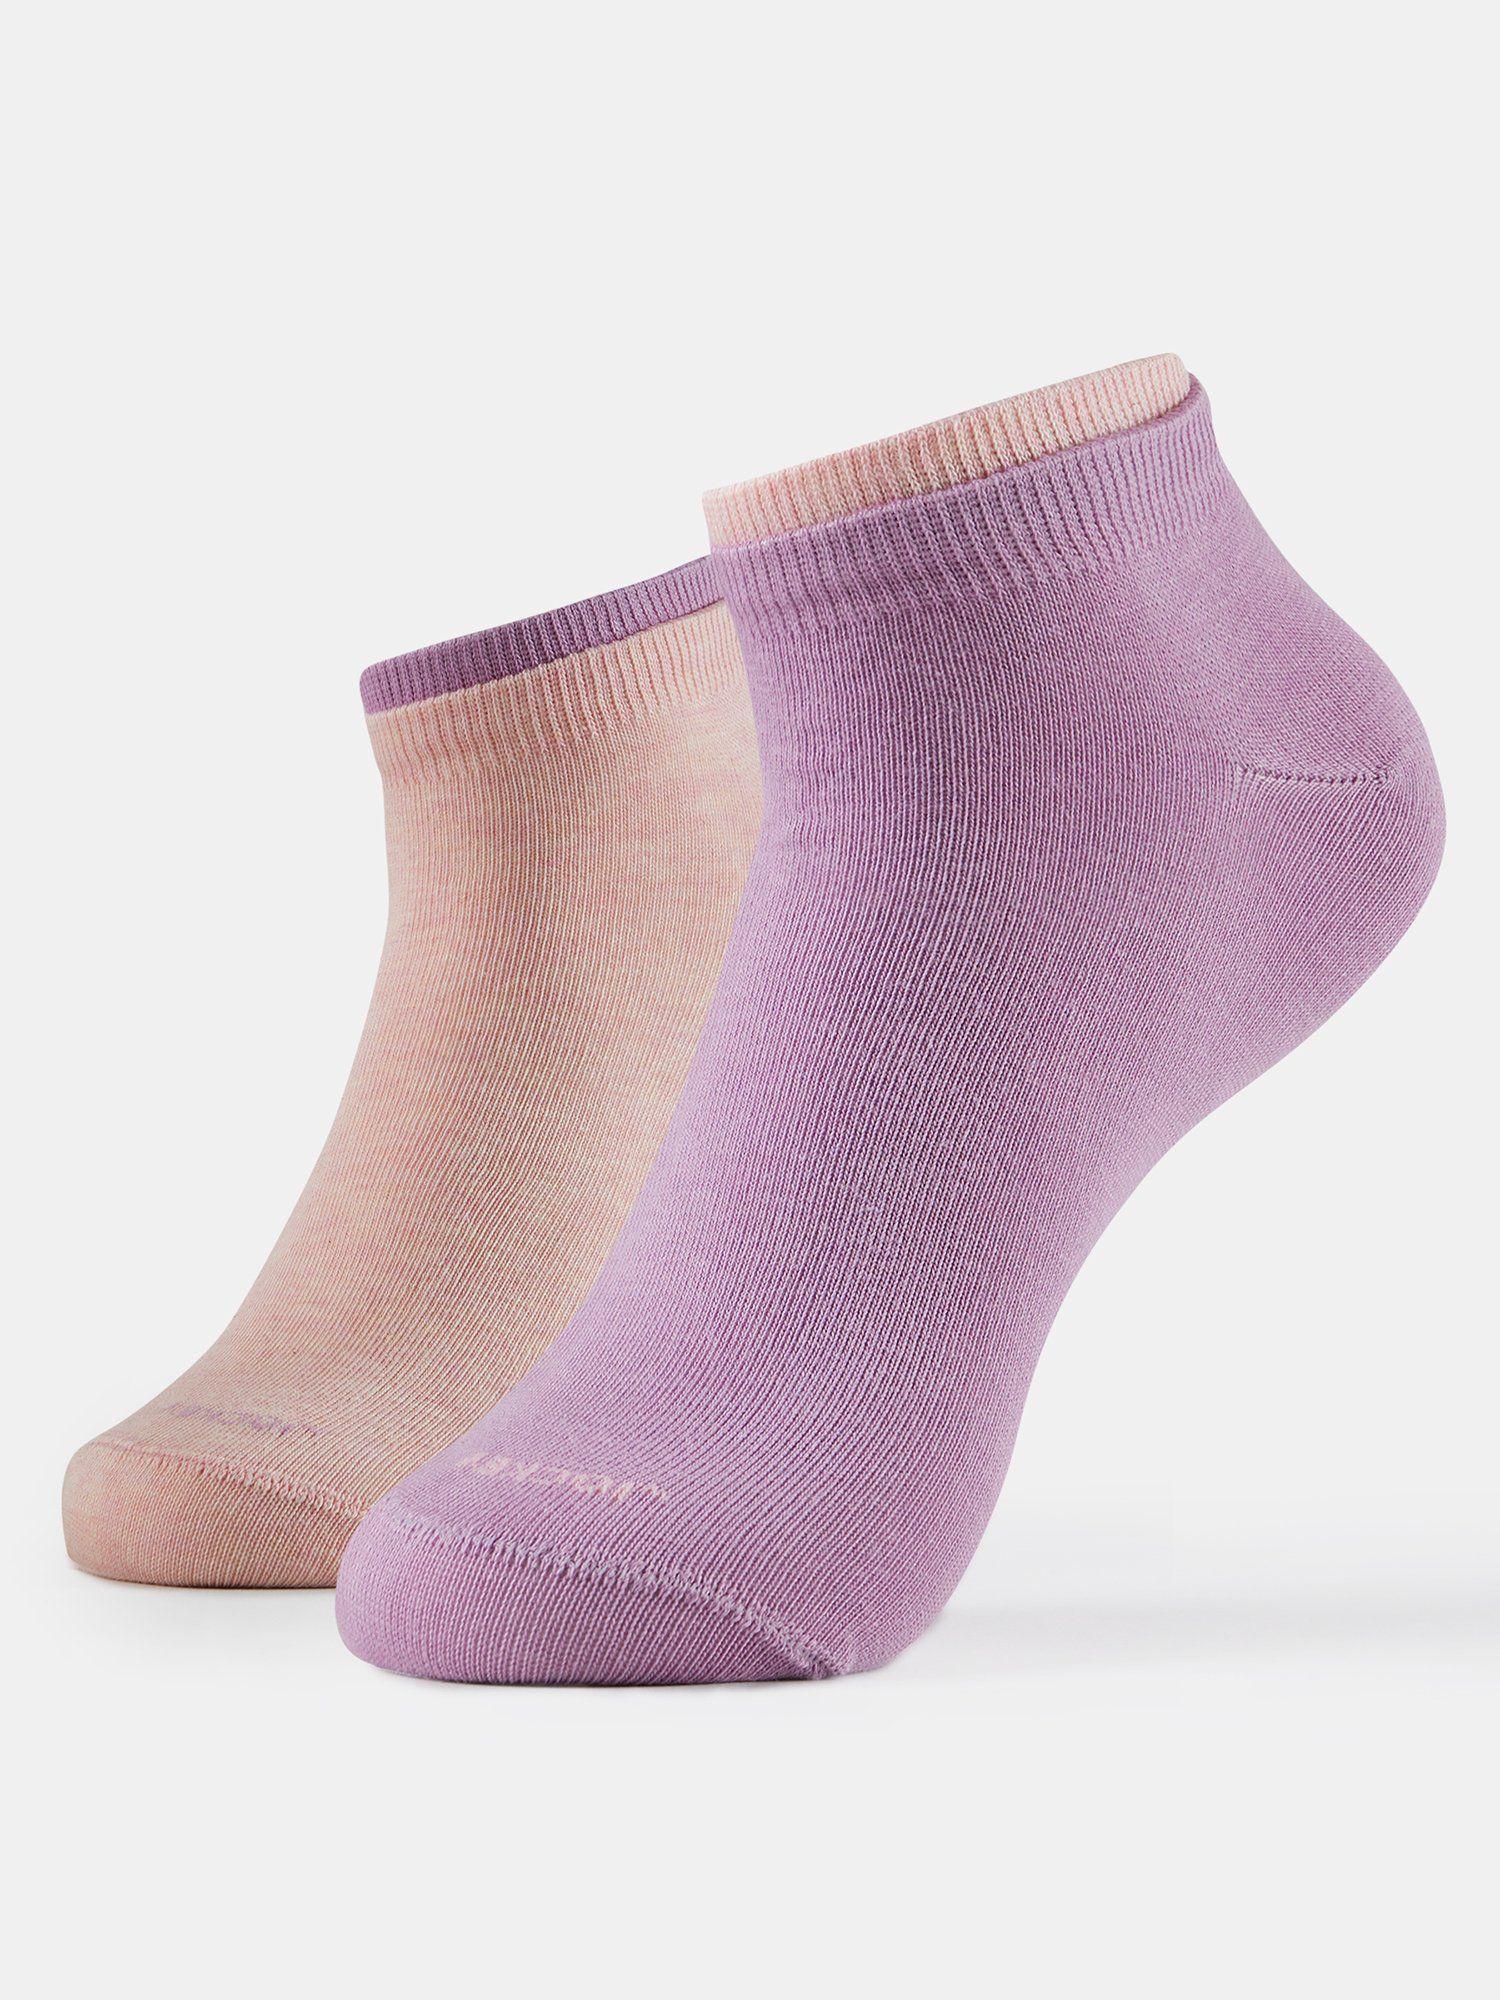 7491 womens cotton stretch low show socks - multi-color (pack of 2)